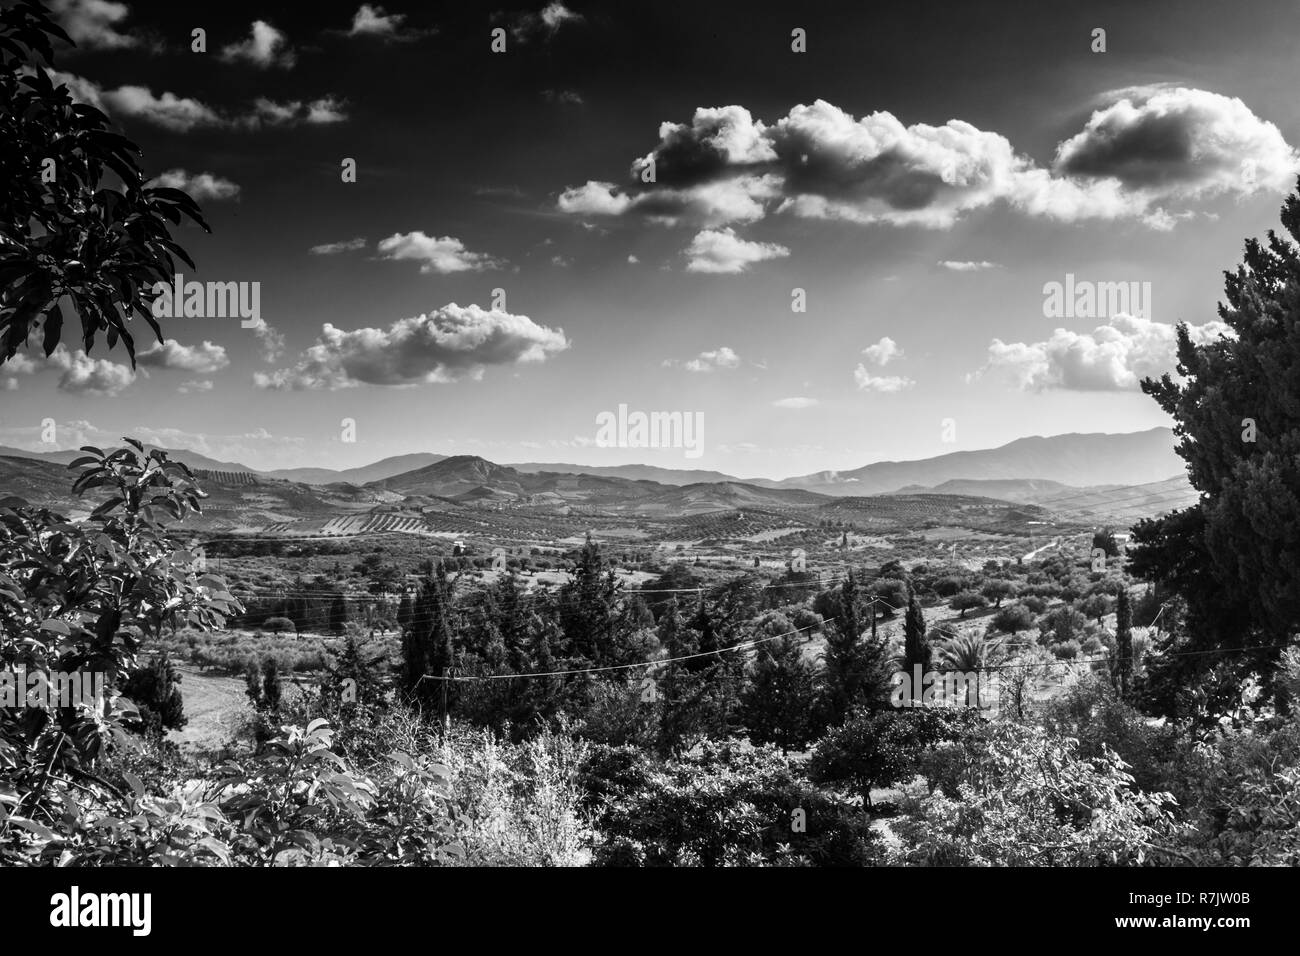 Scenic view of a landscape, Greece Stock Photo